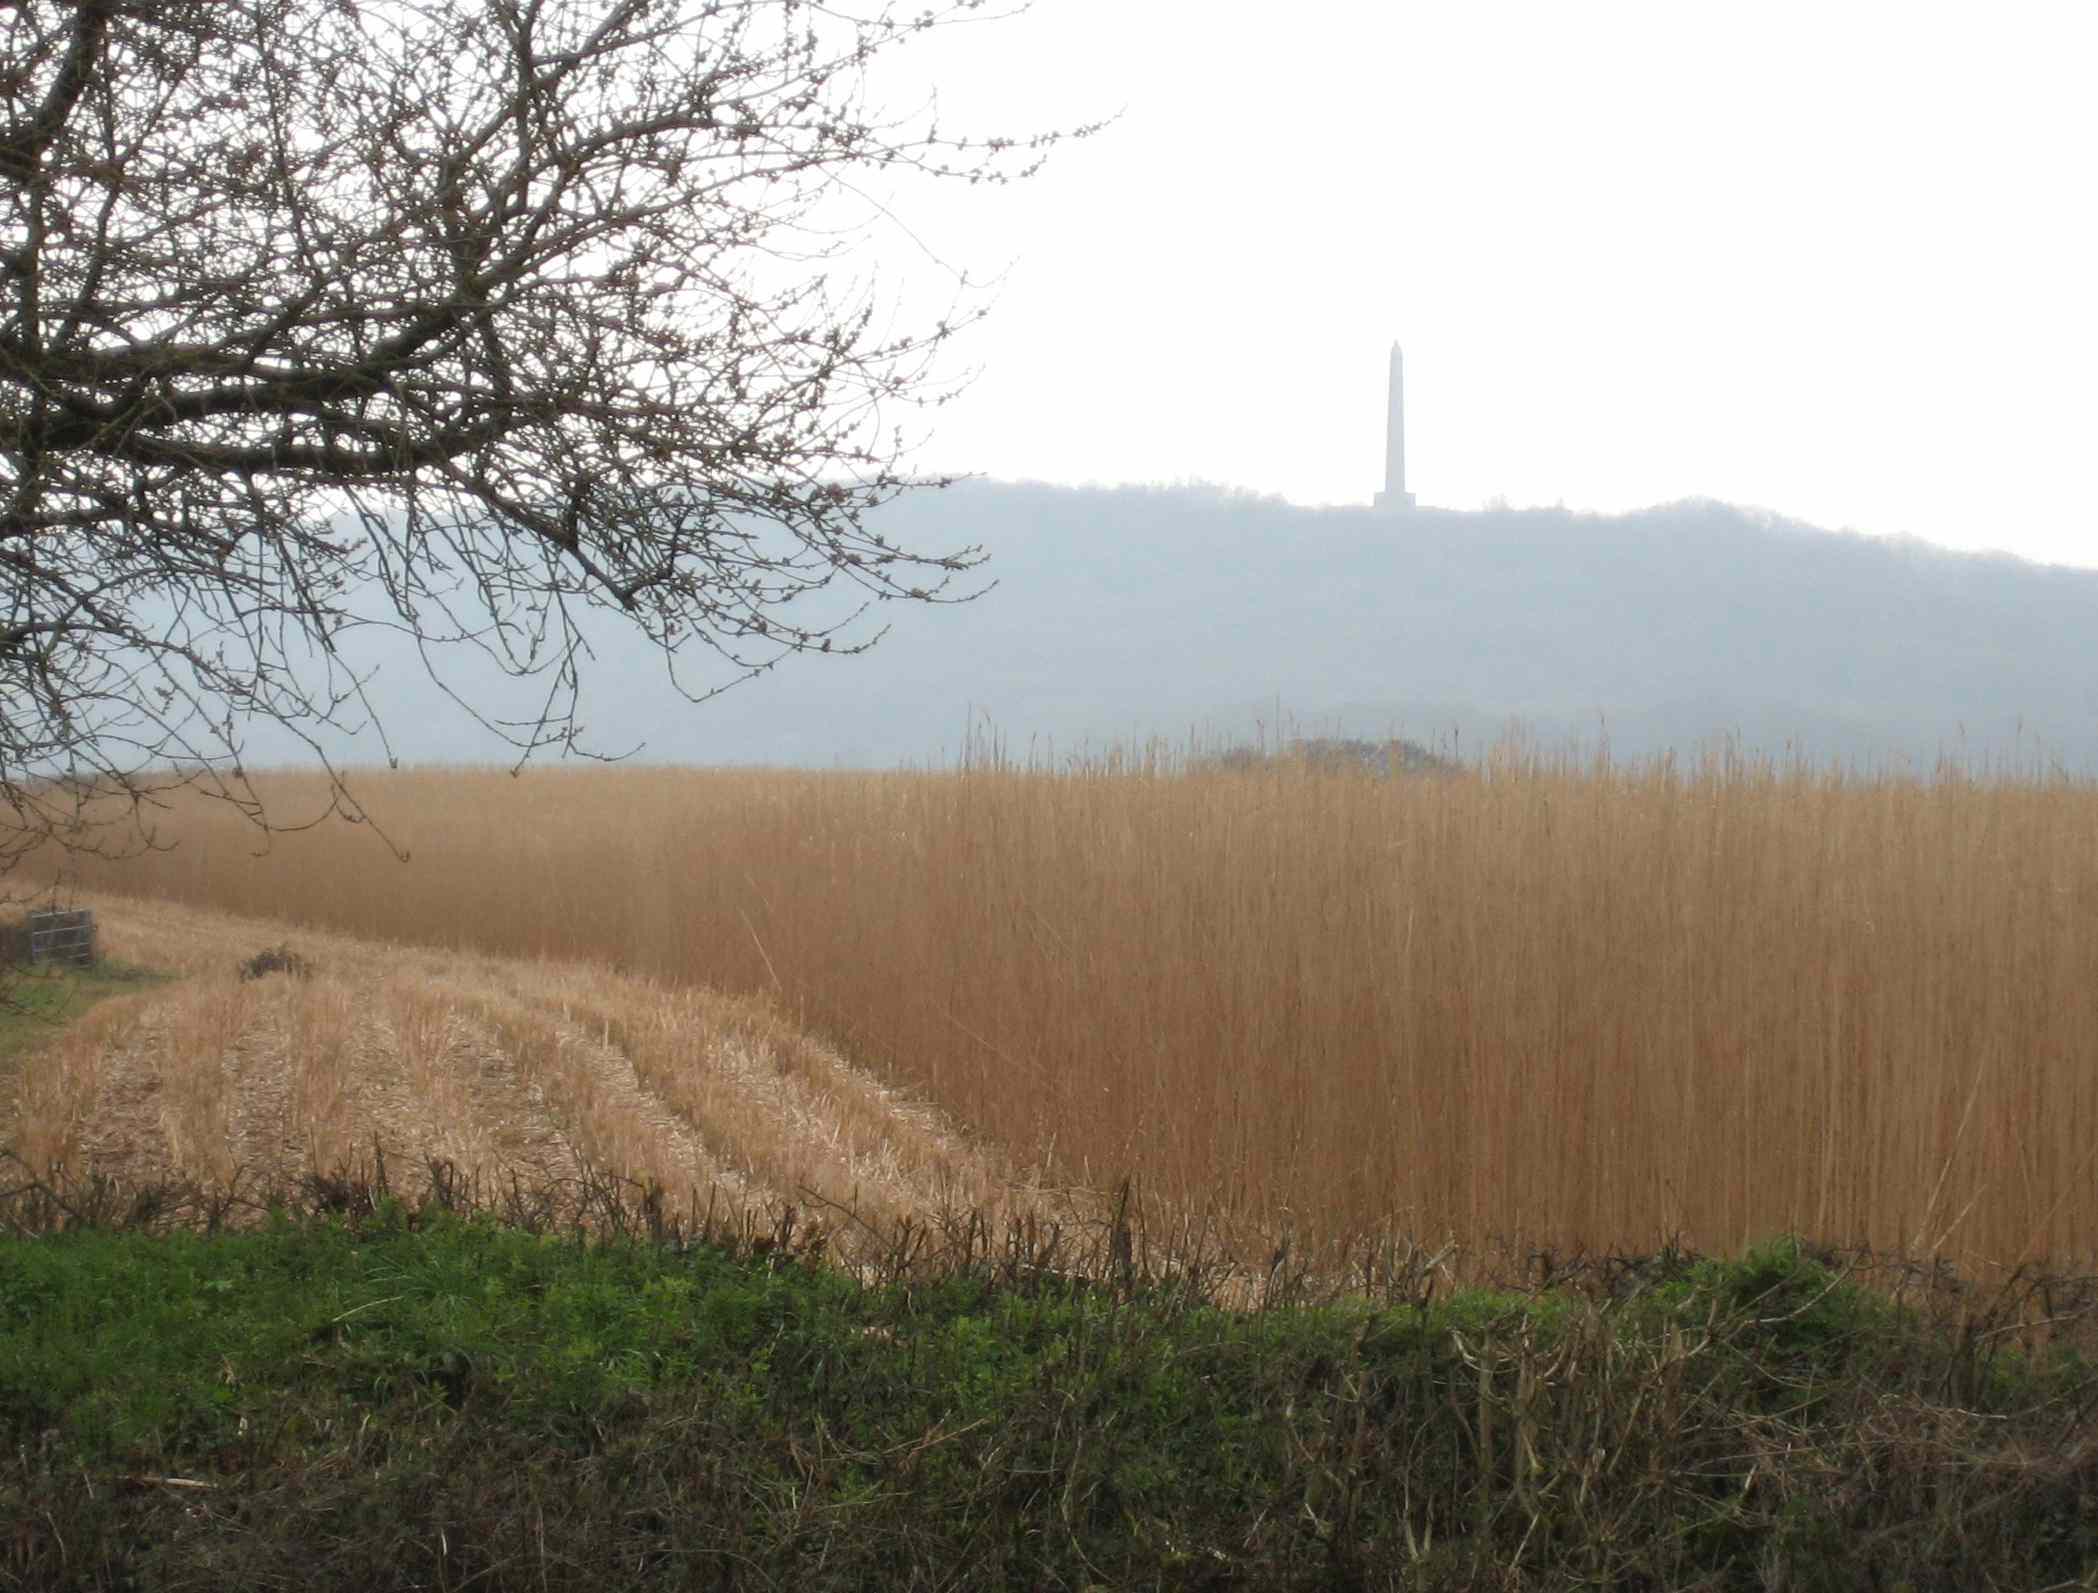 DN11 Wellington monument and wheat field